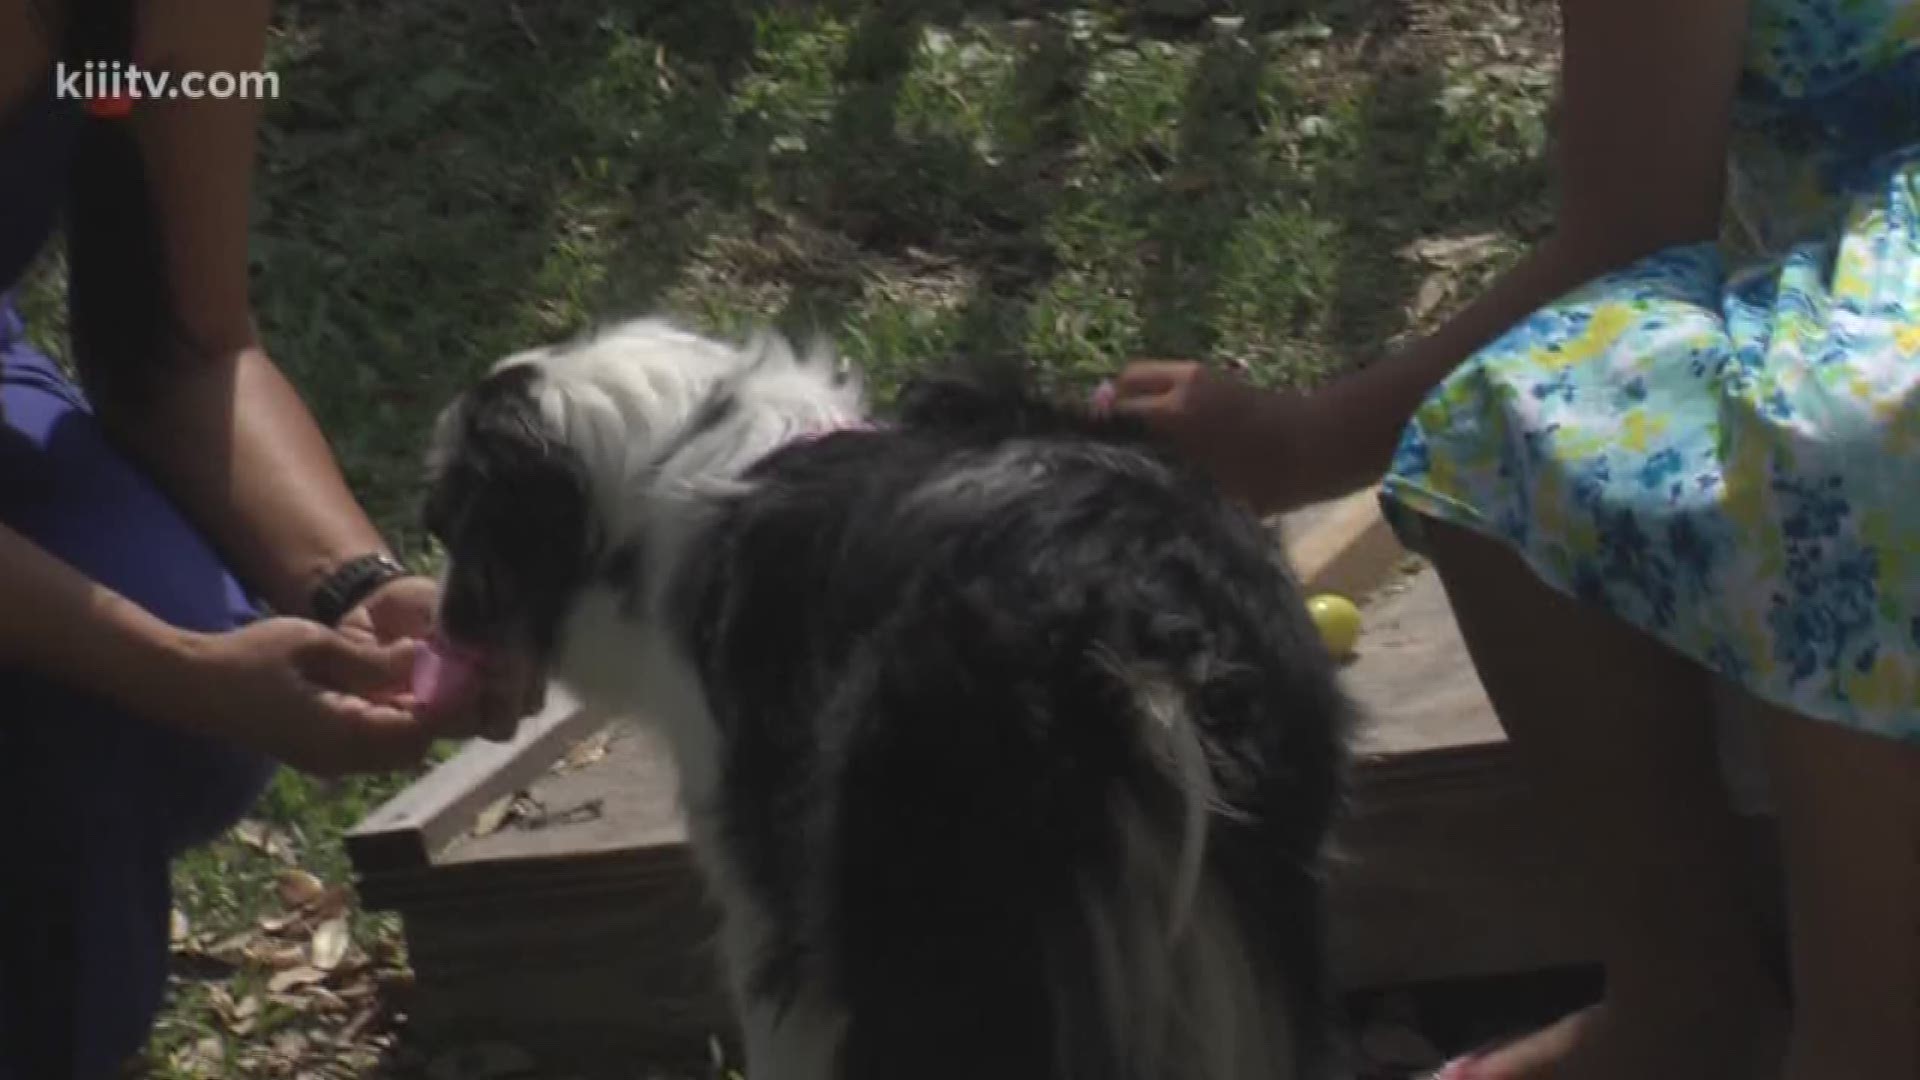 The new dog park welcomed furry friends for a unique egg hunt